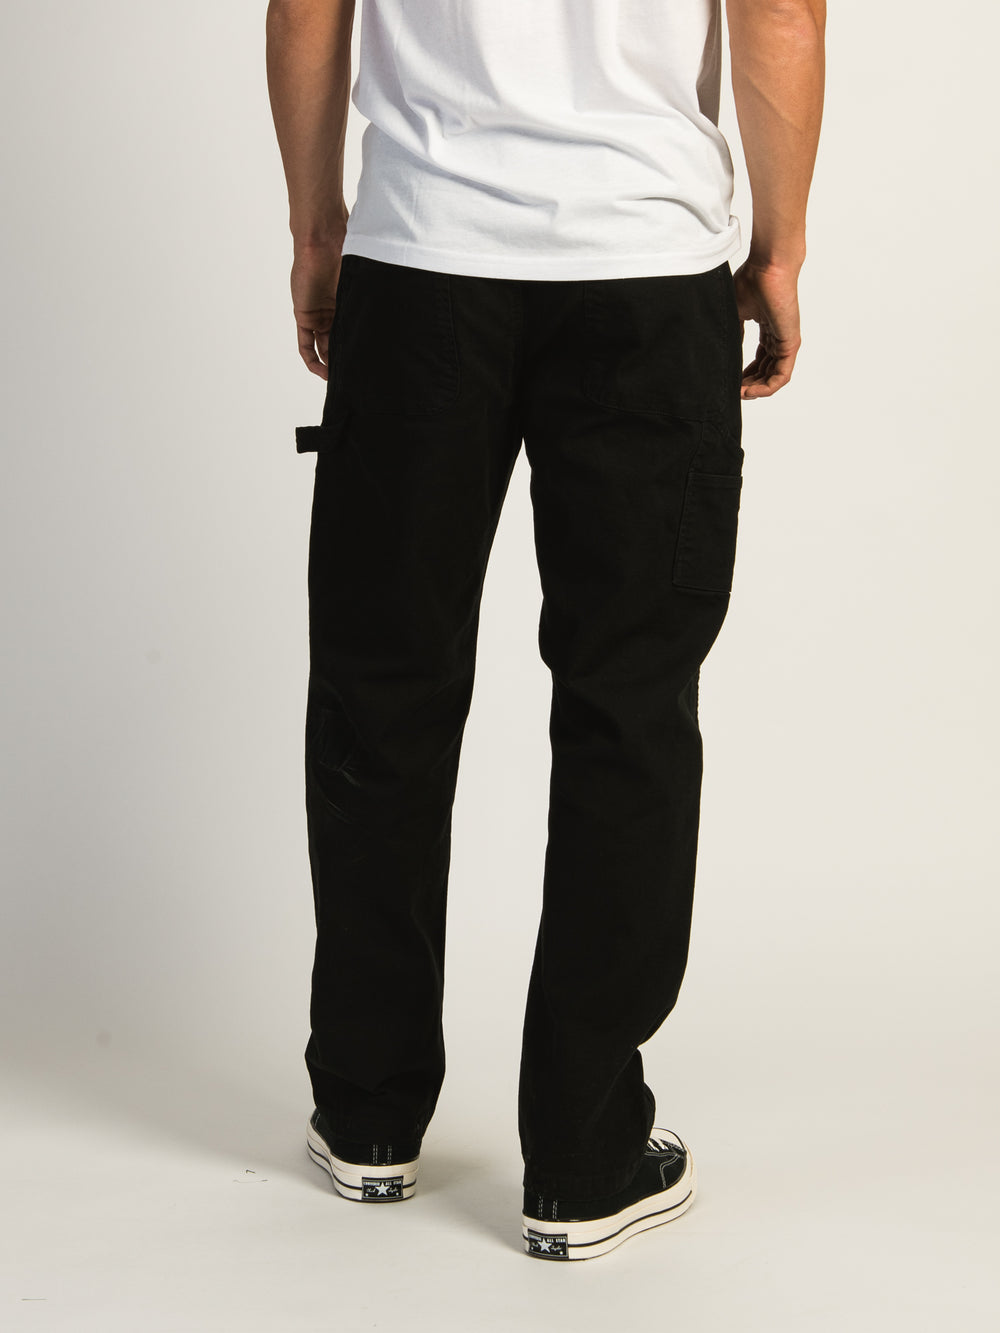 TAINTED MAXWELL UTILITY PANT